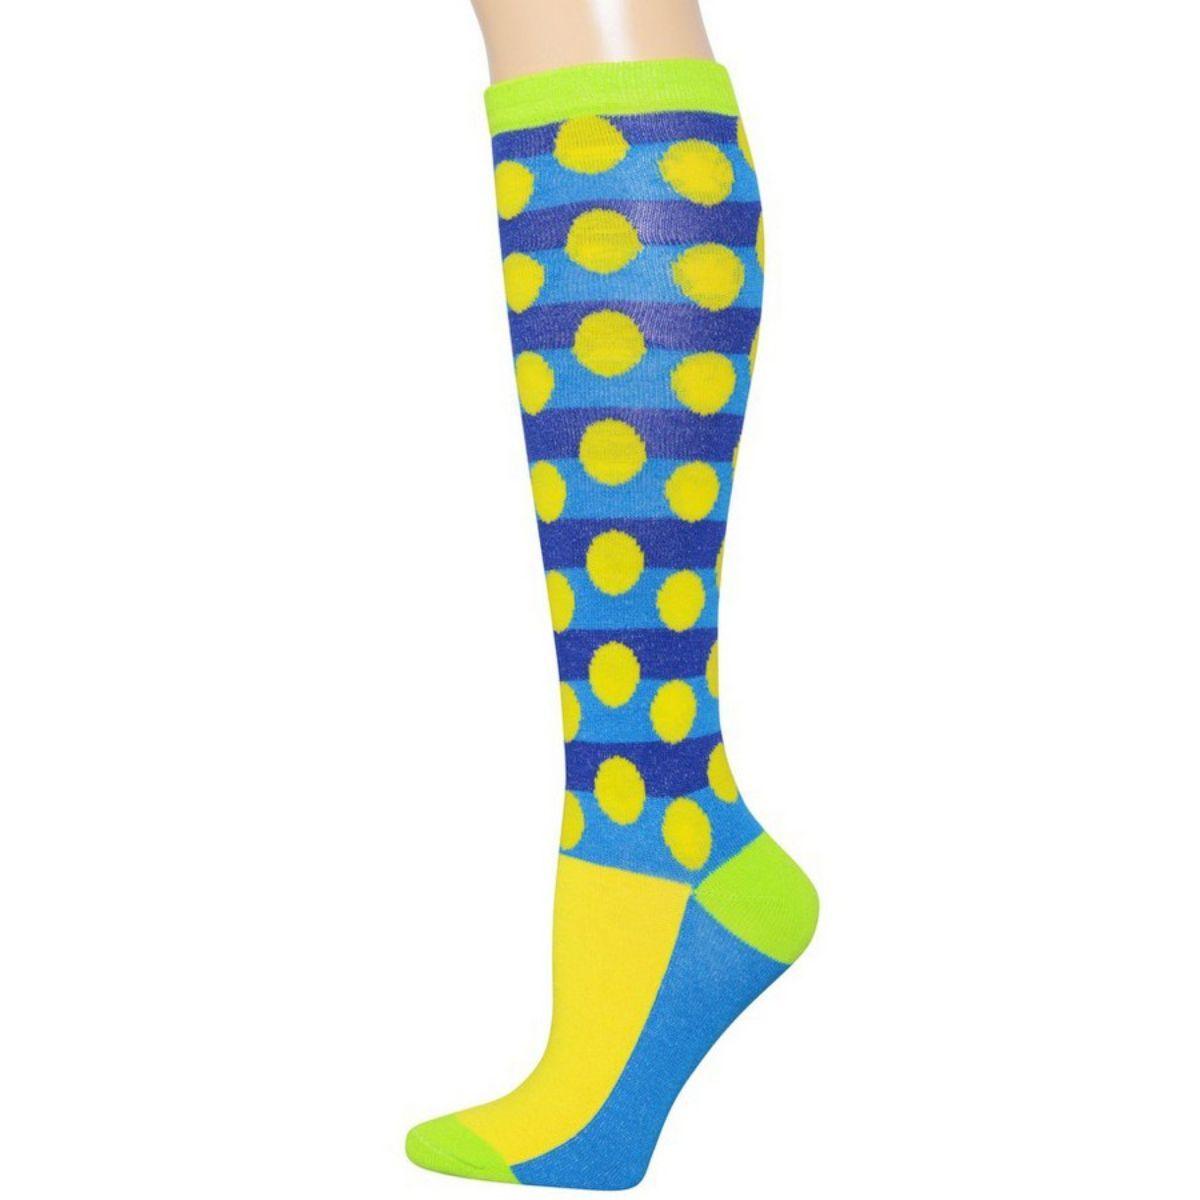 Step Up Your Style: Fun Yellow Polka Dot Knee High Socks for Women